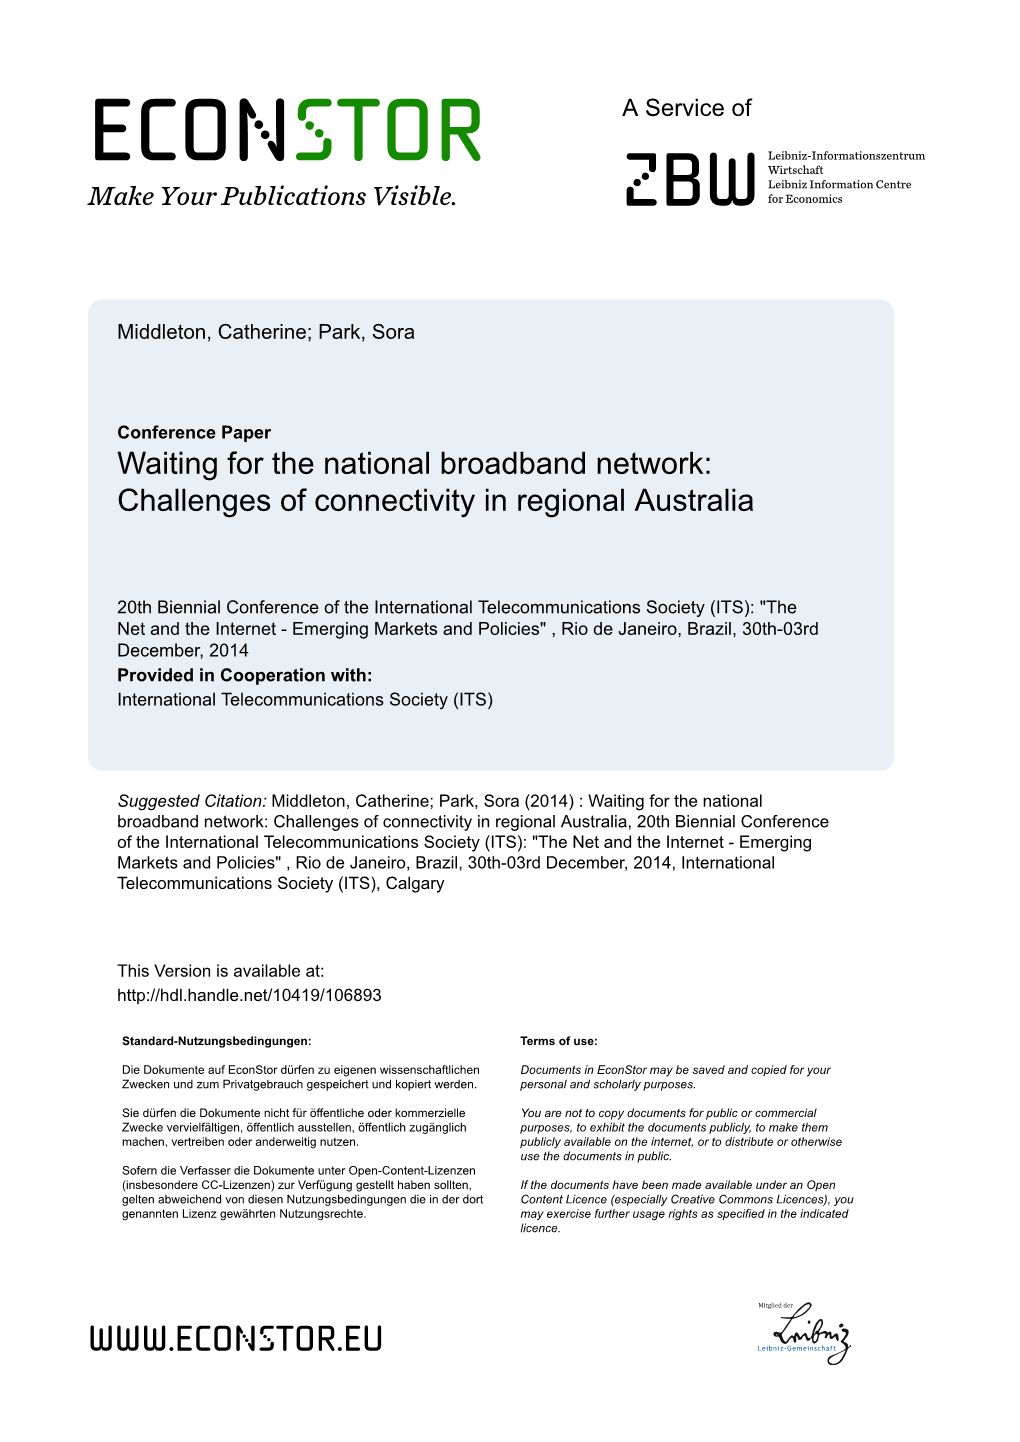 Waiting for the National Broadband Network: Challenges of Connectivity in Regional Australia